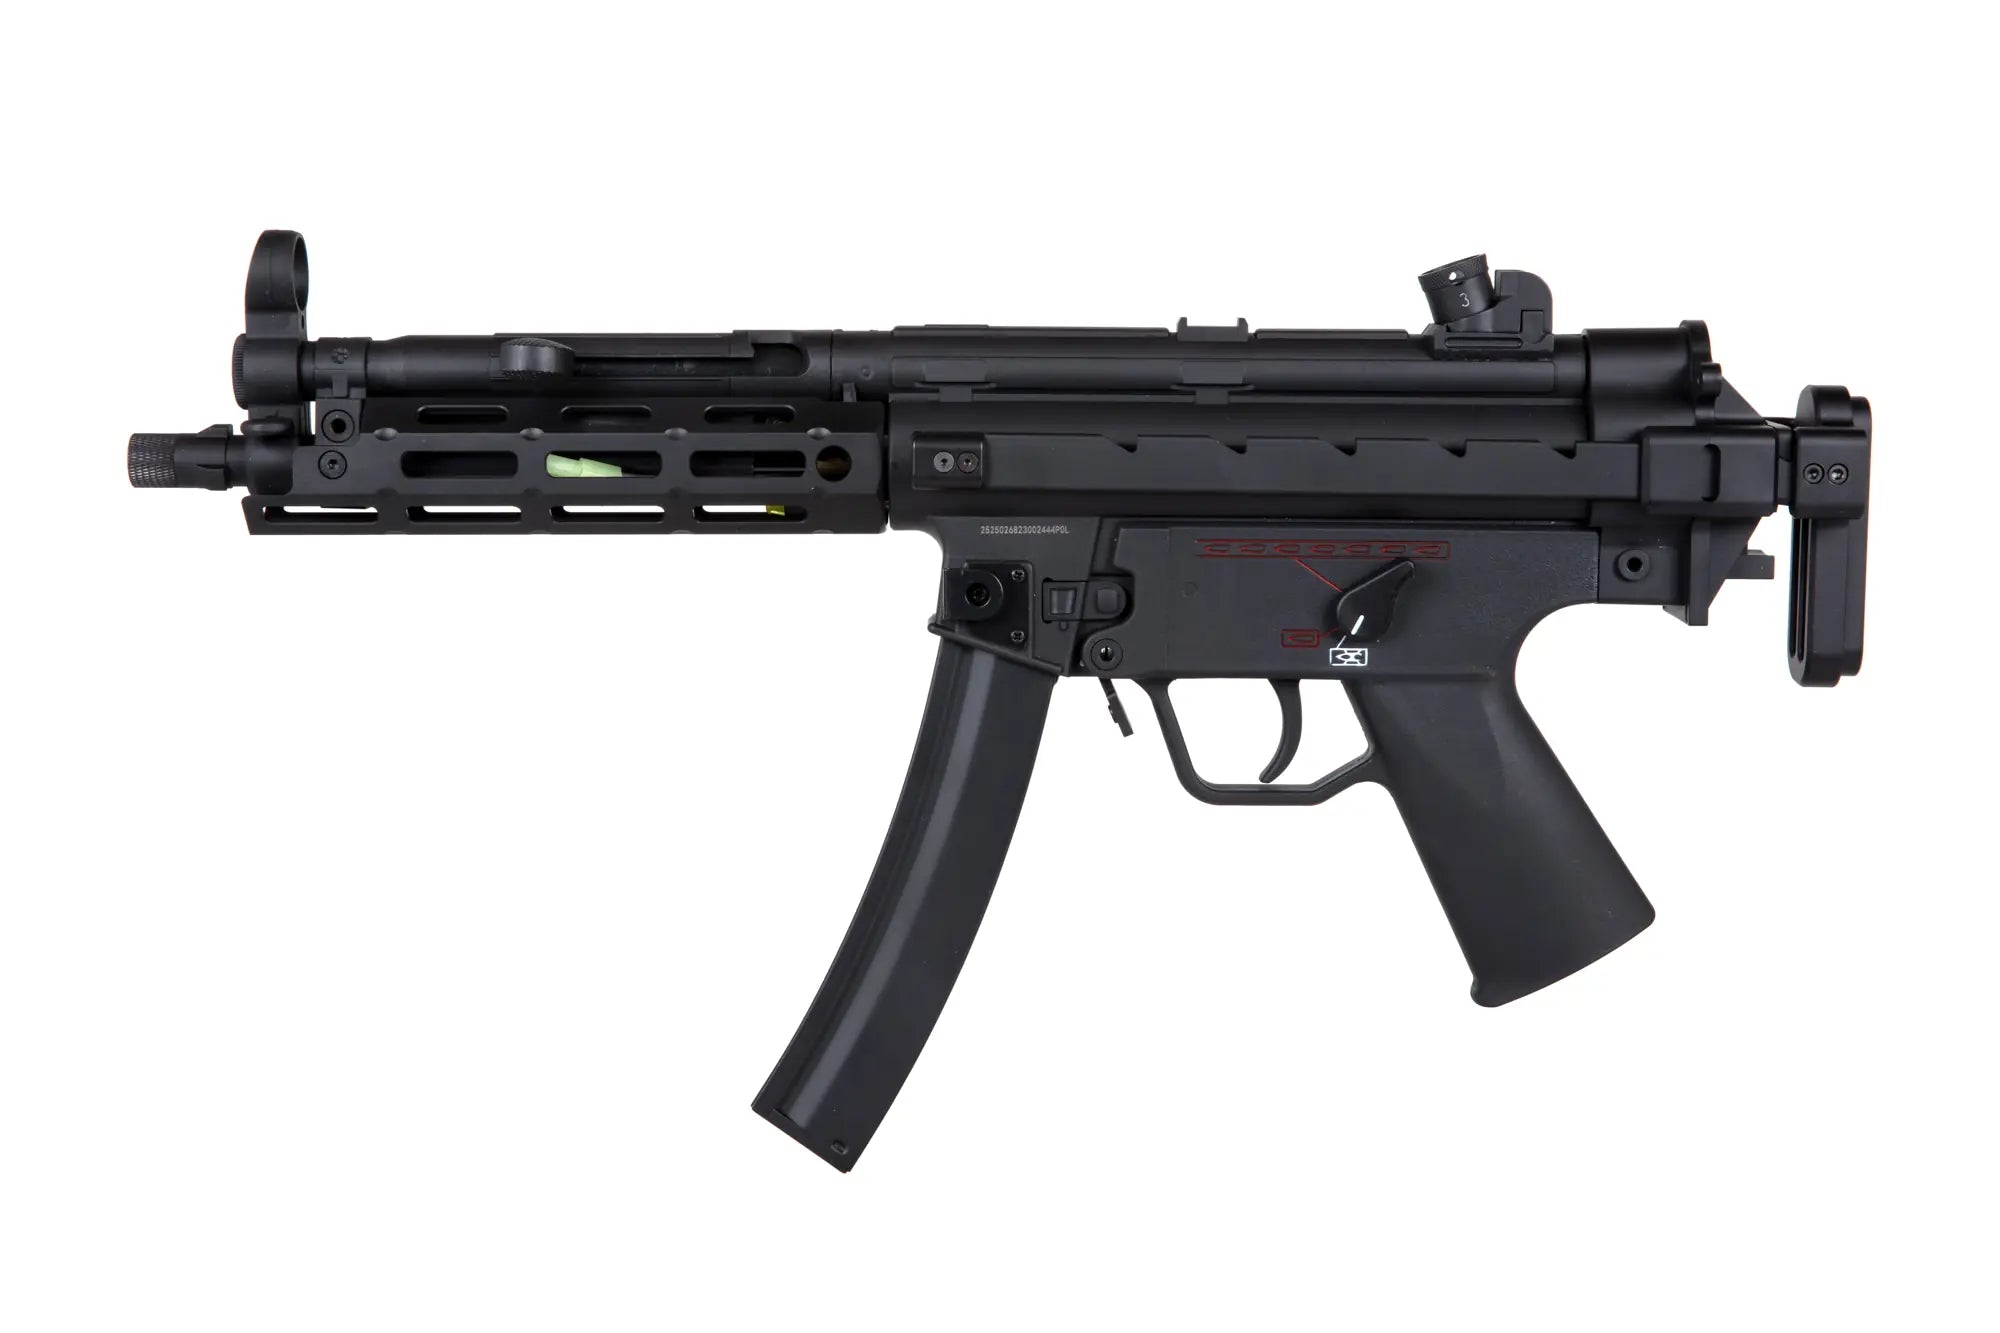 MP5 airsoft gun from Golden Eagle